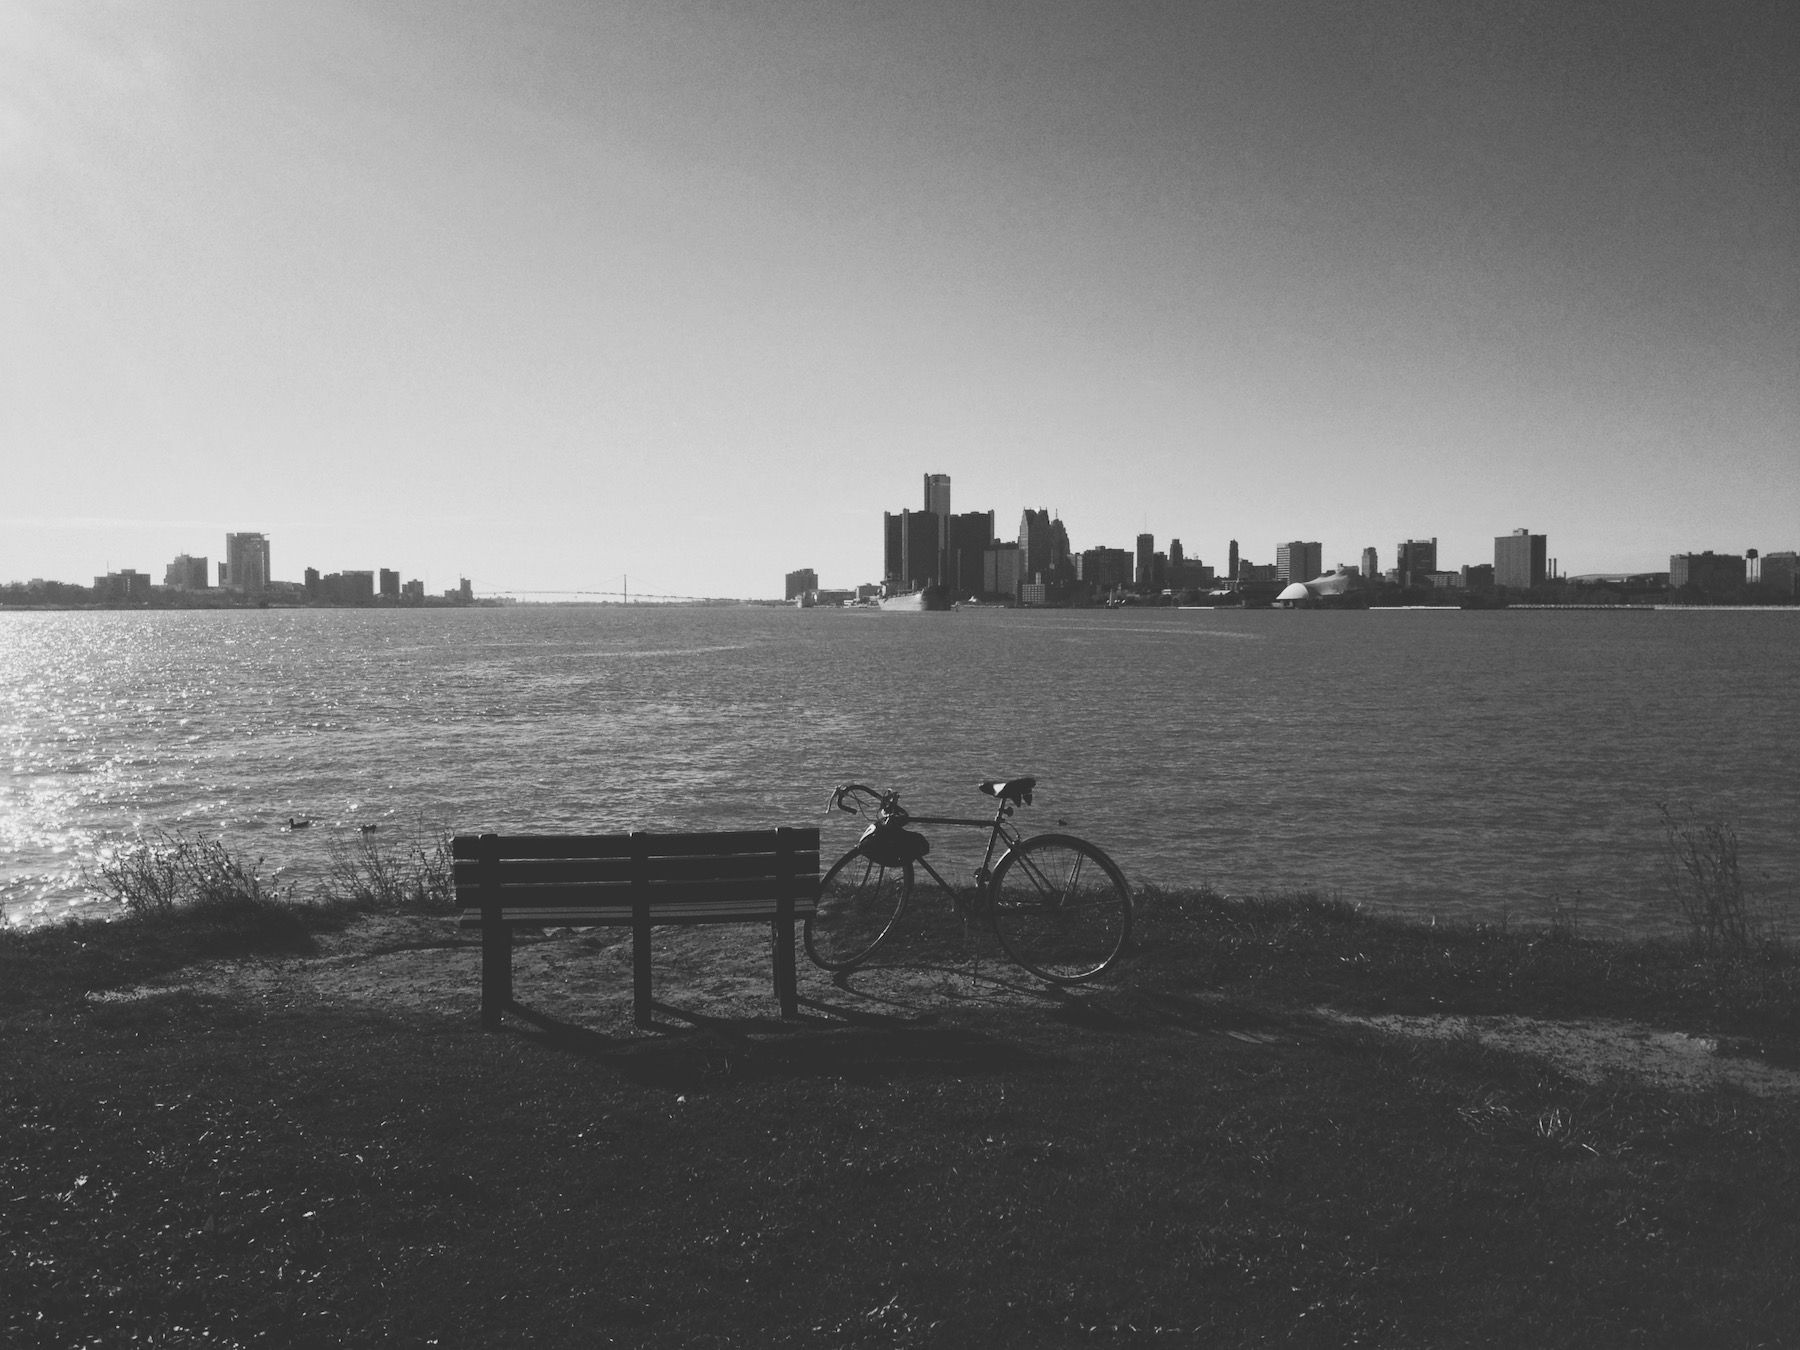 Black and white bike parked next to bench. Detroit river and skyline in background.